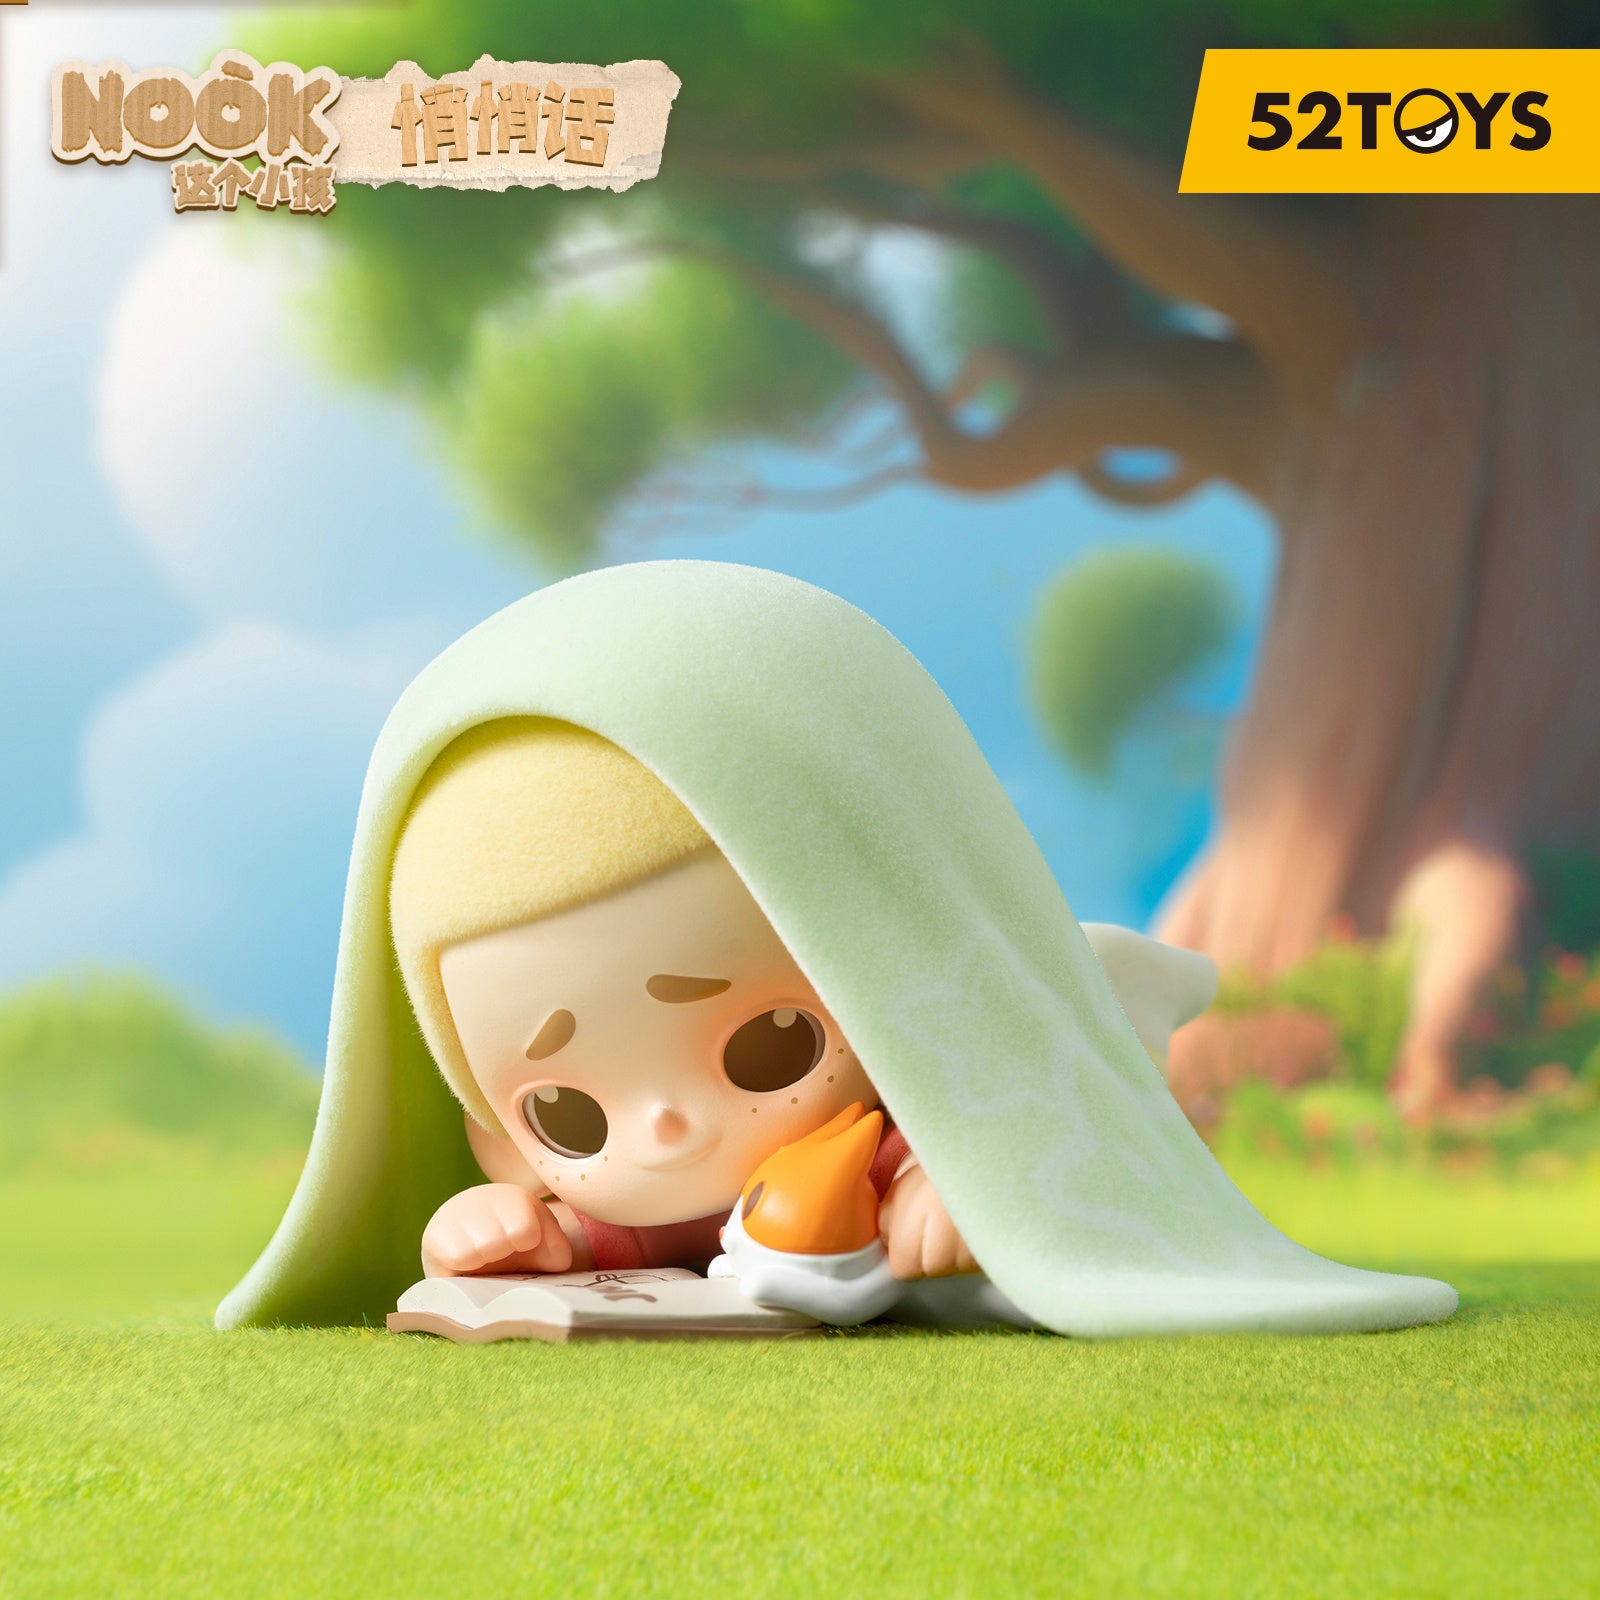 [52TOYS] NOOK - The Kid Series Blind Box